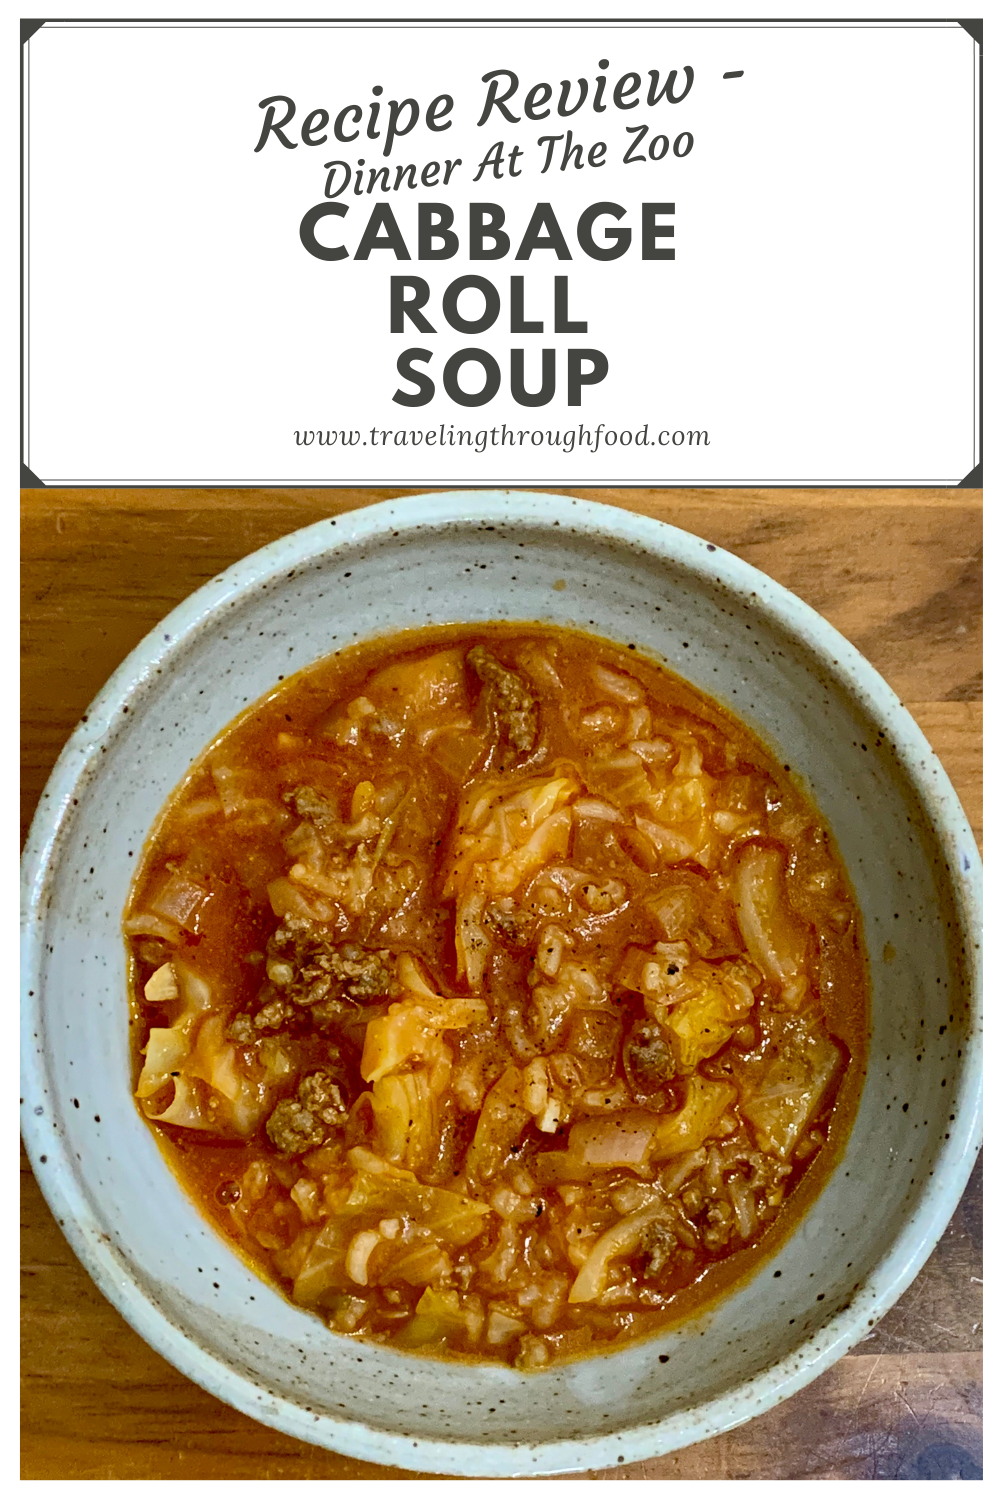 Halupki Stuffed Cabbage Soup aka Cabbage Roll Soup Dinner At The Zoo Recipe Review Traveling Through Food Blog